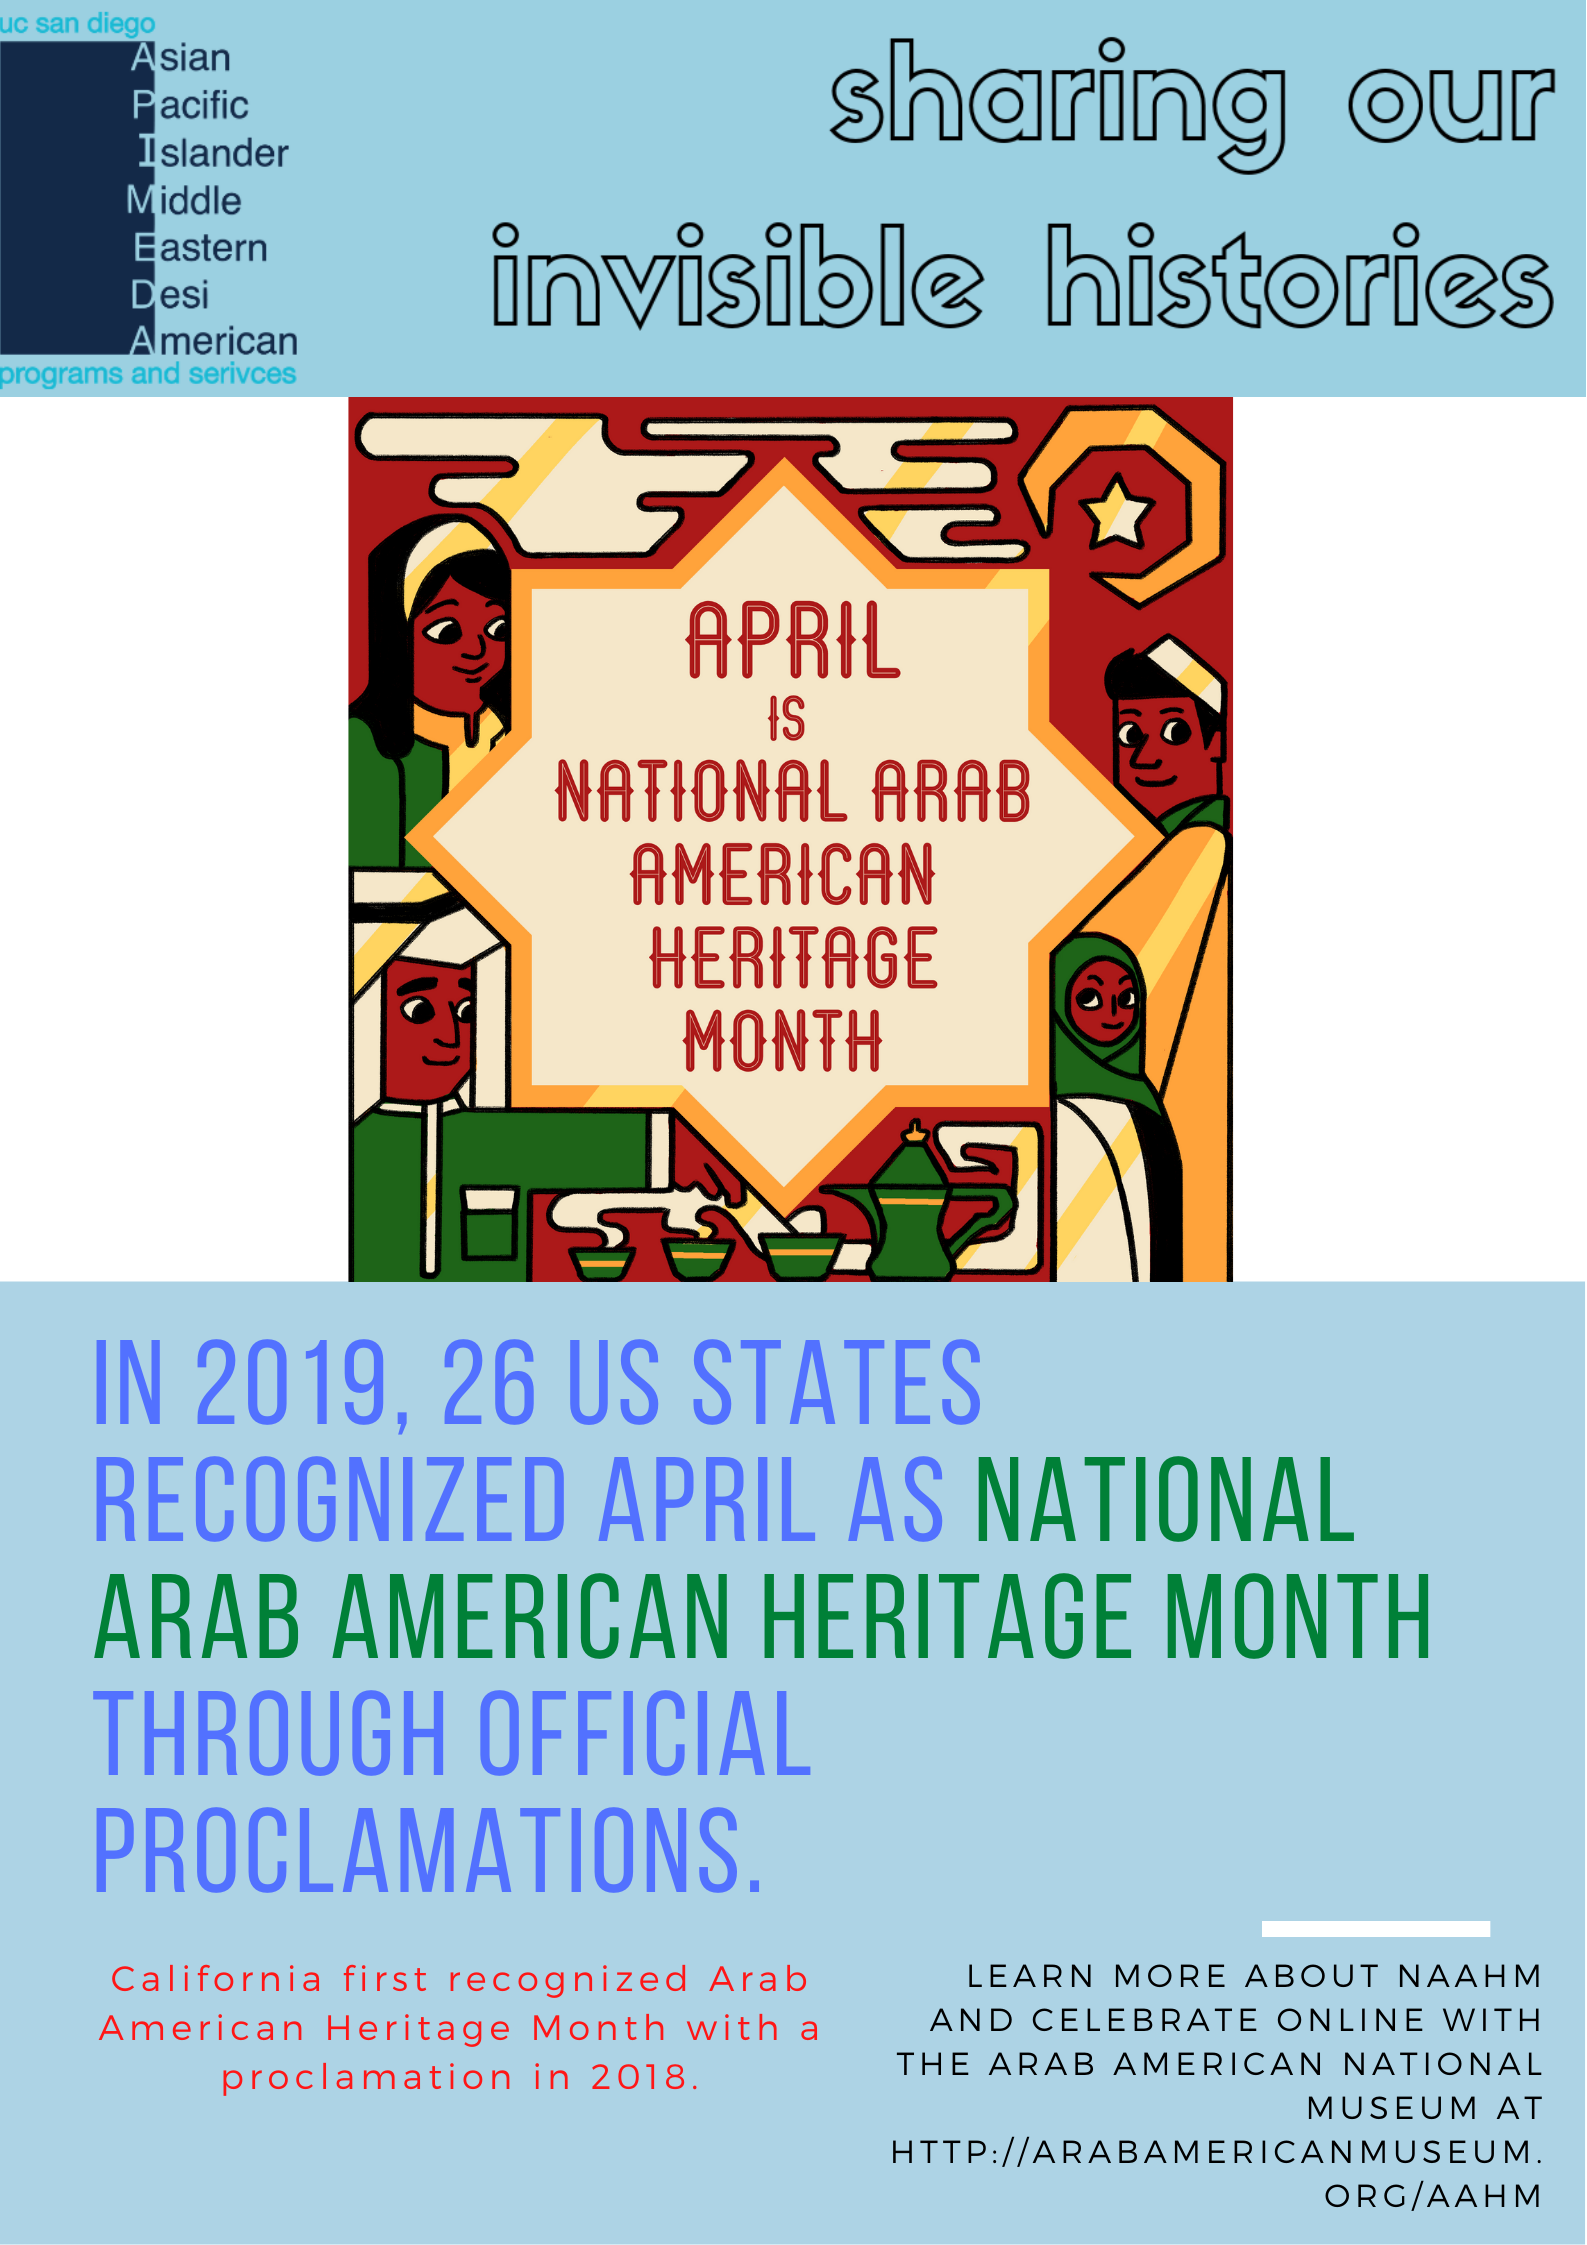 Image of the first National Arab American Heritage Month logo